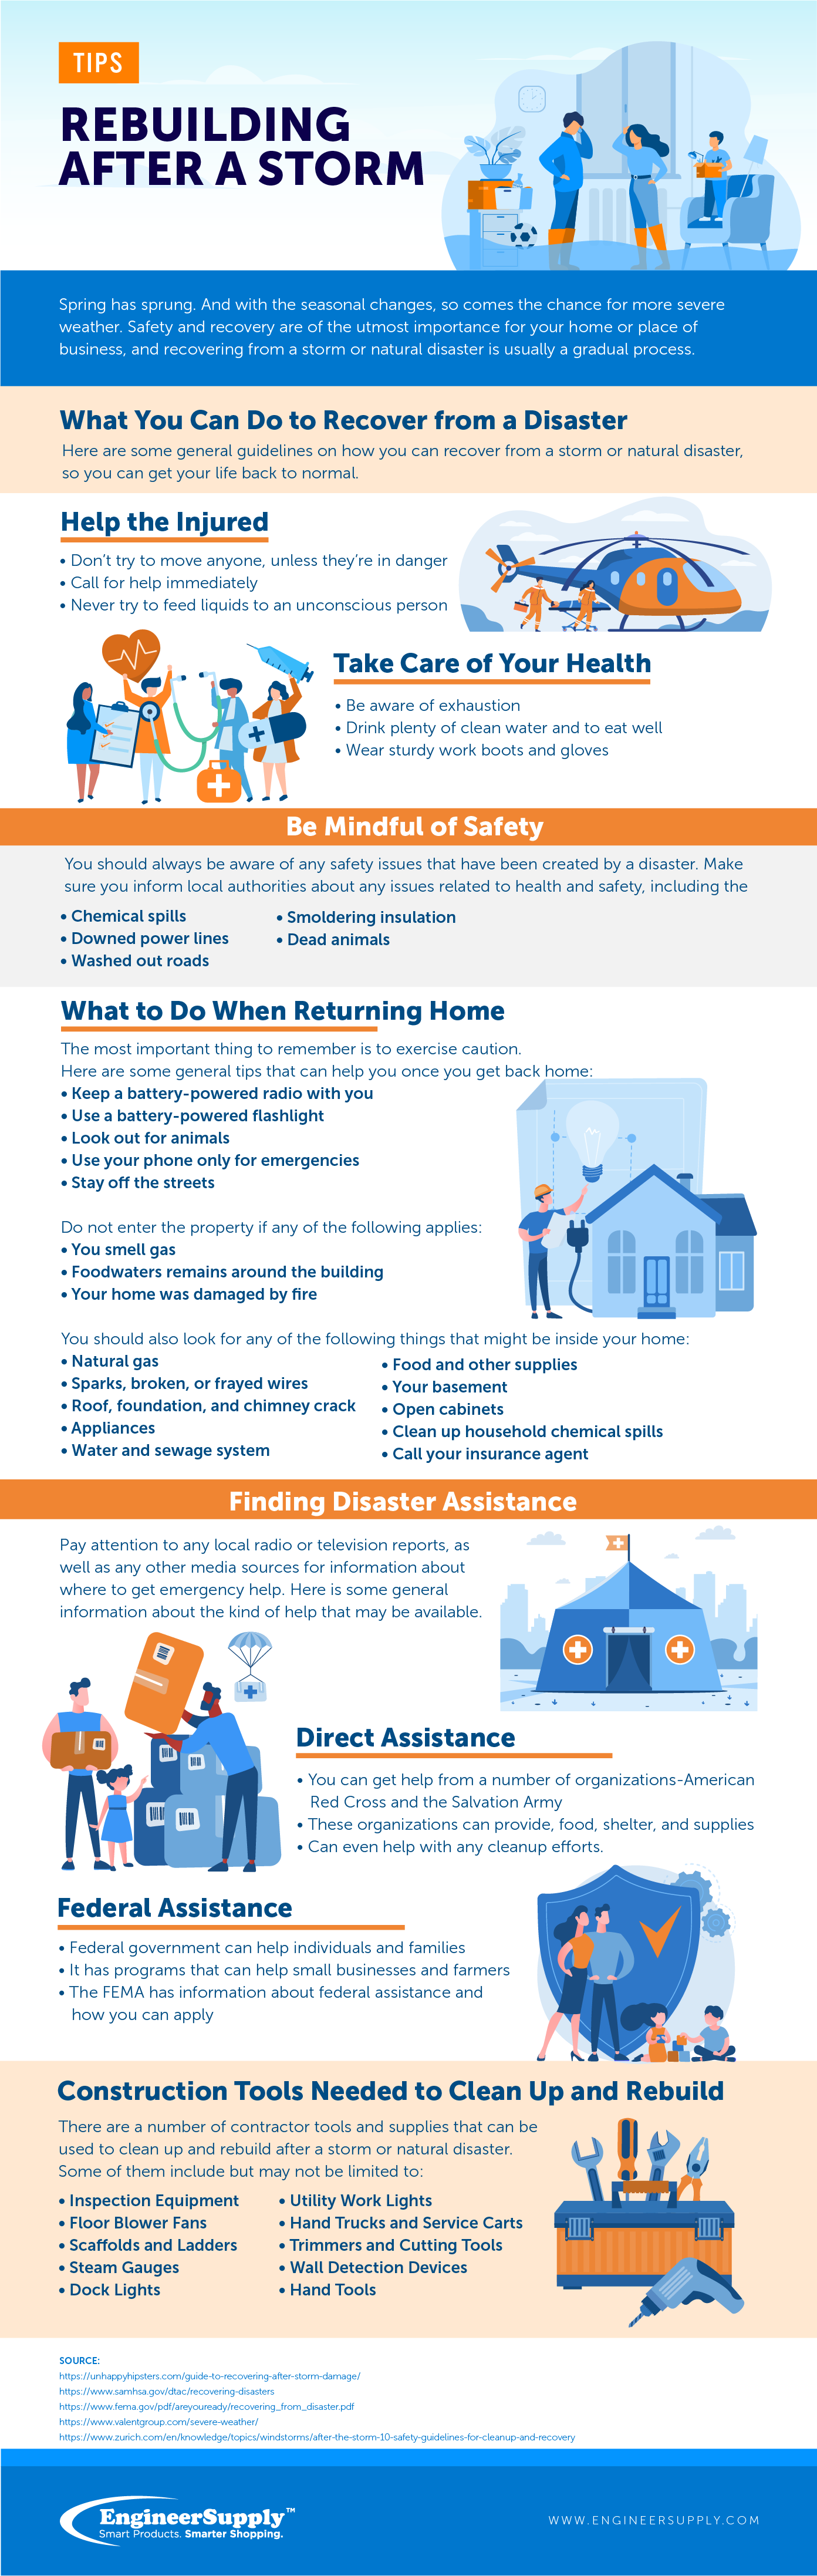 Rebuilding after the Storm infographic